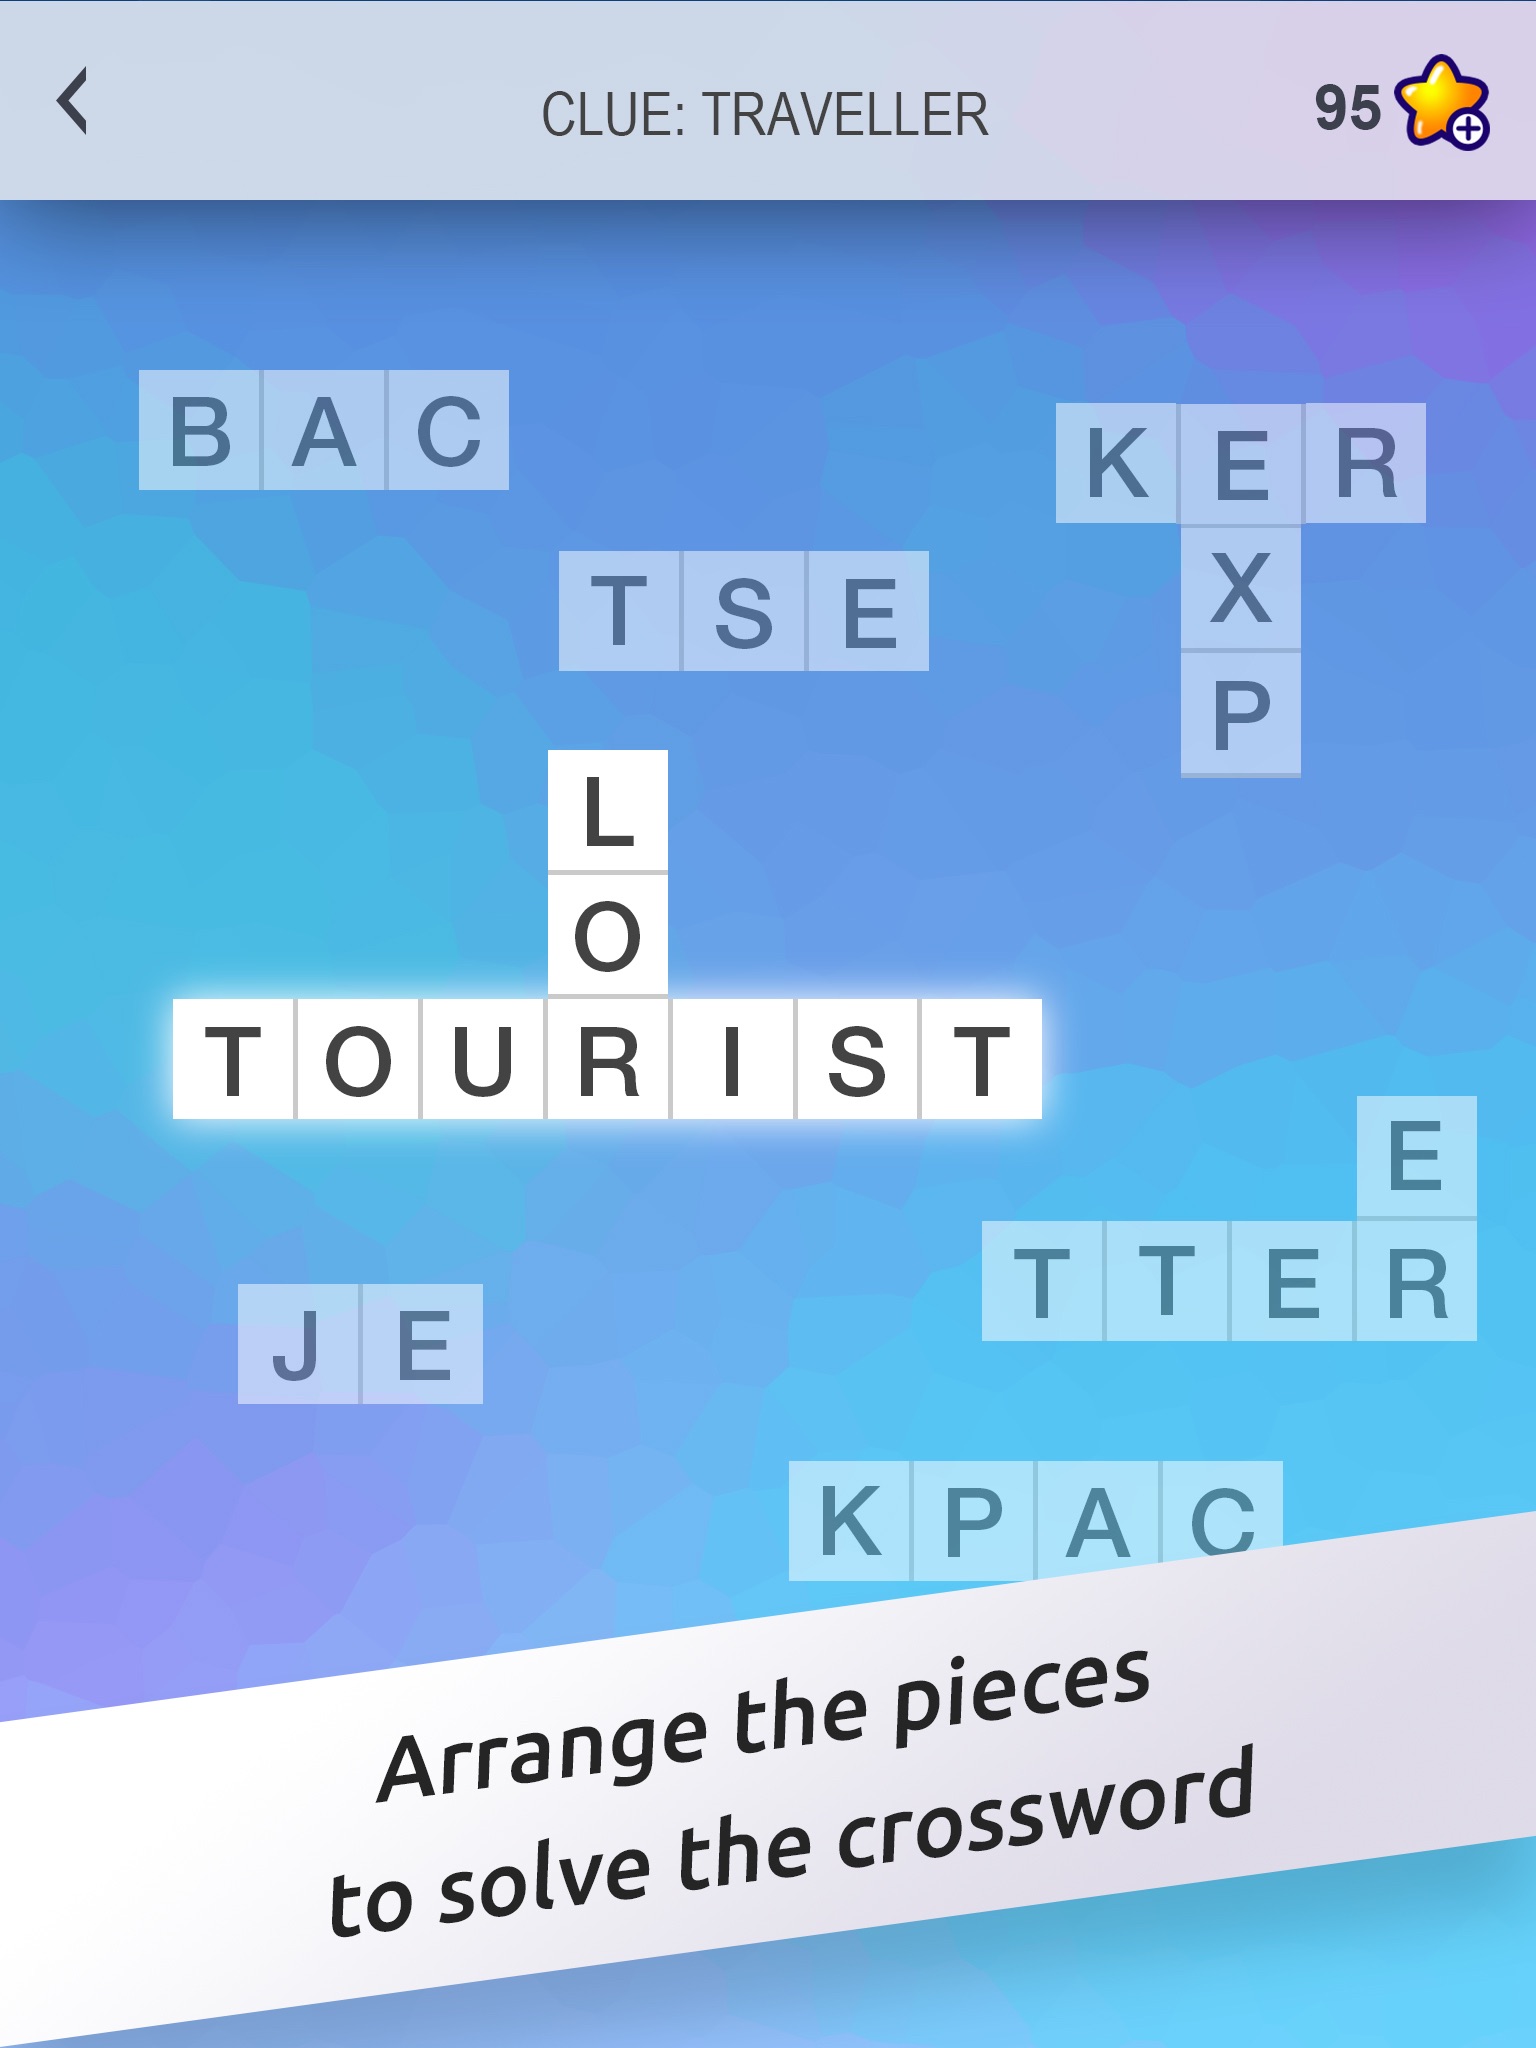 Crossword Jigsaw Word Search and Brain Puzzle with Friends at App